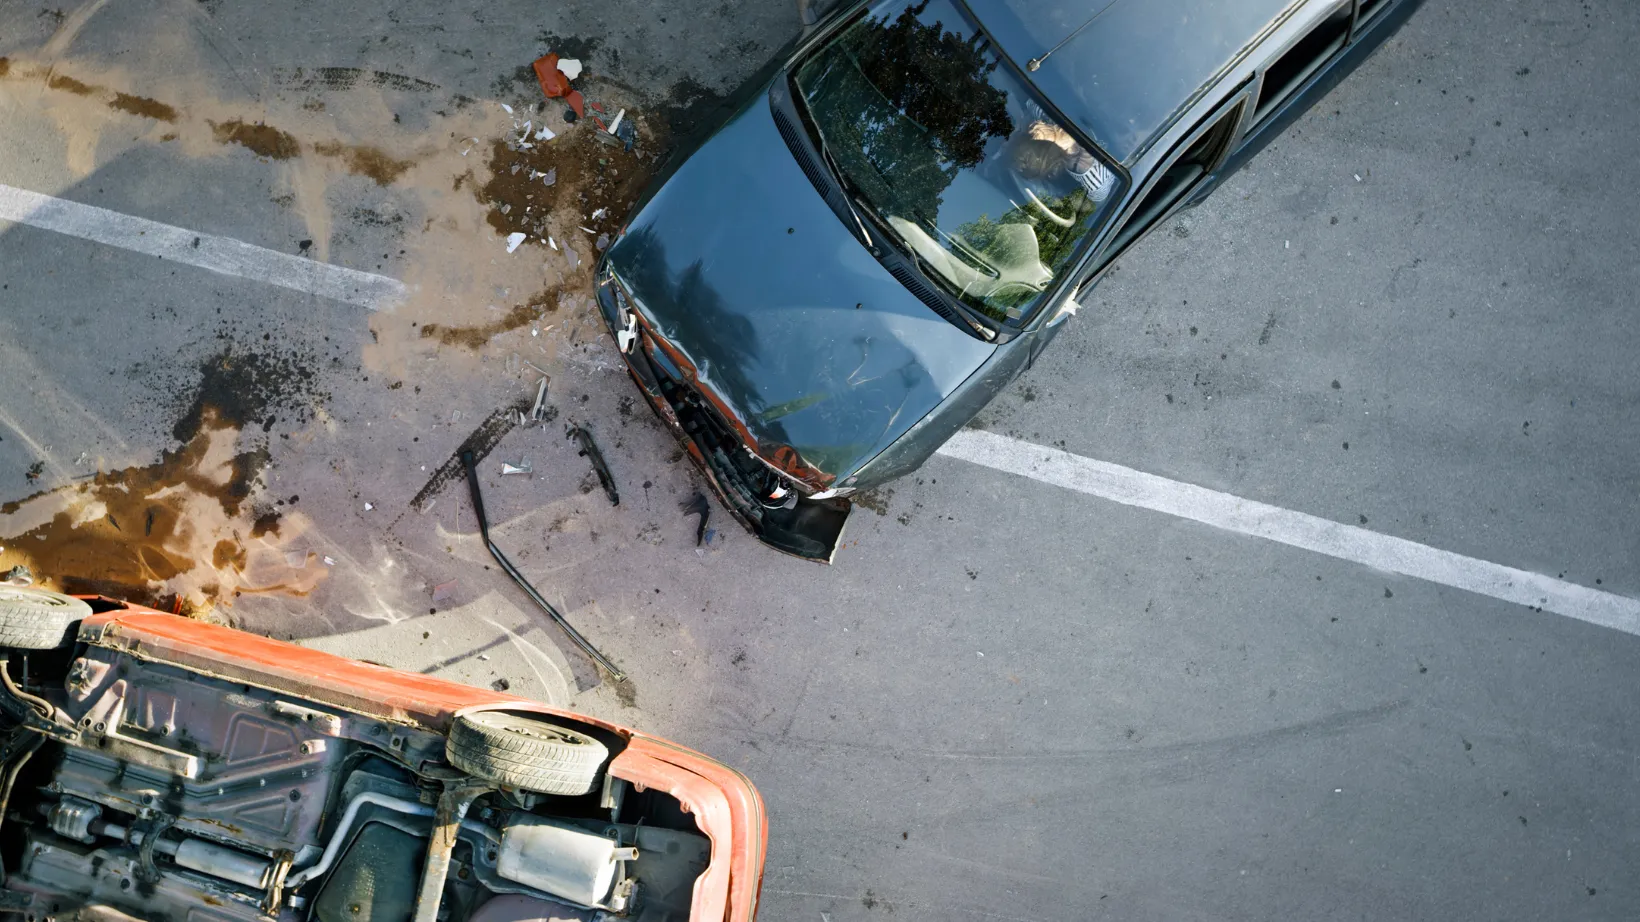 Aerial view of a car accident on a street